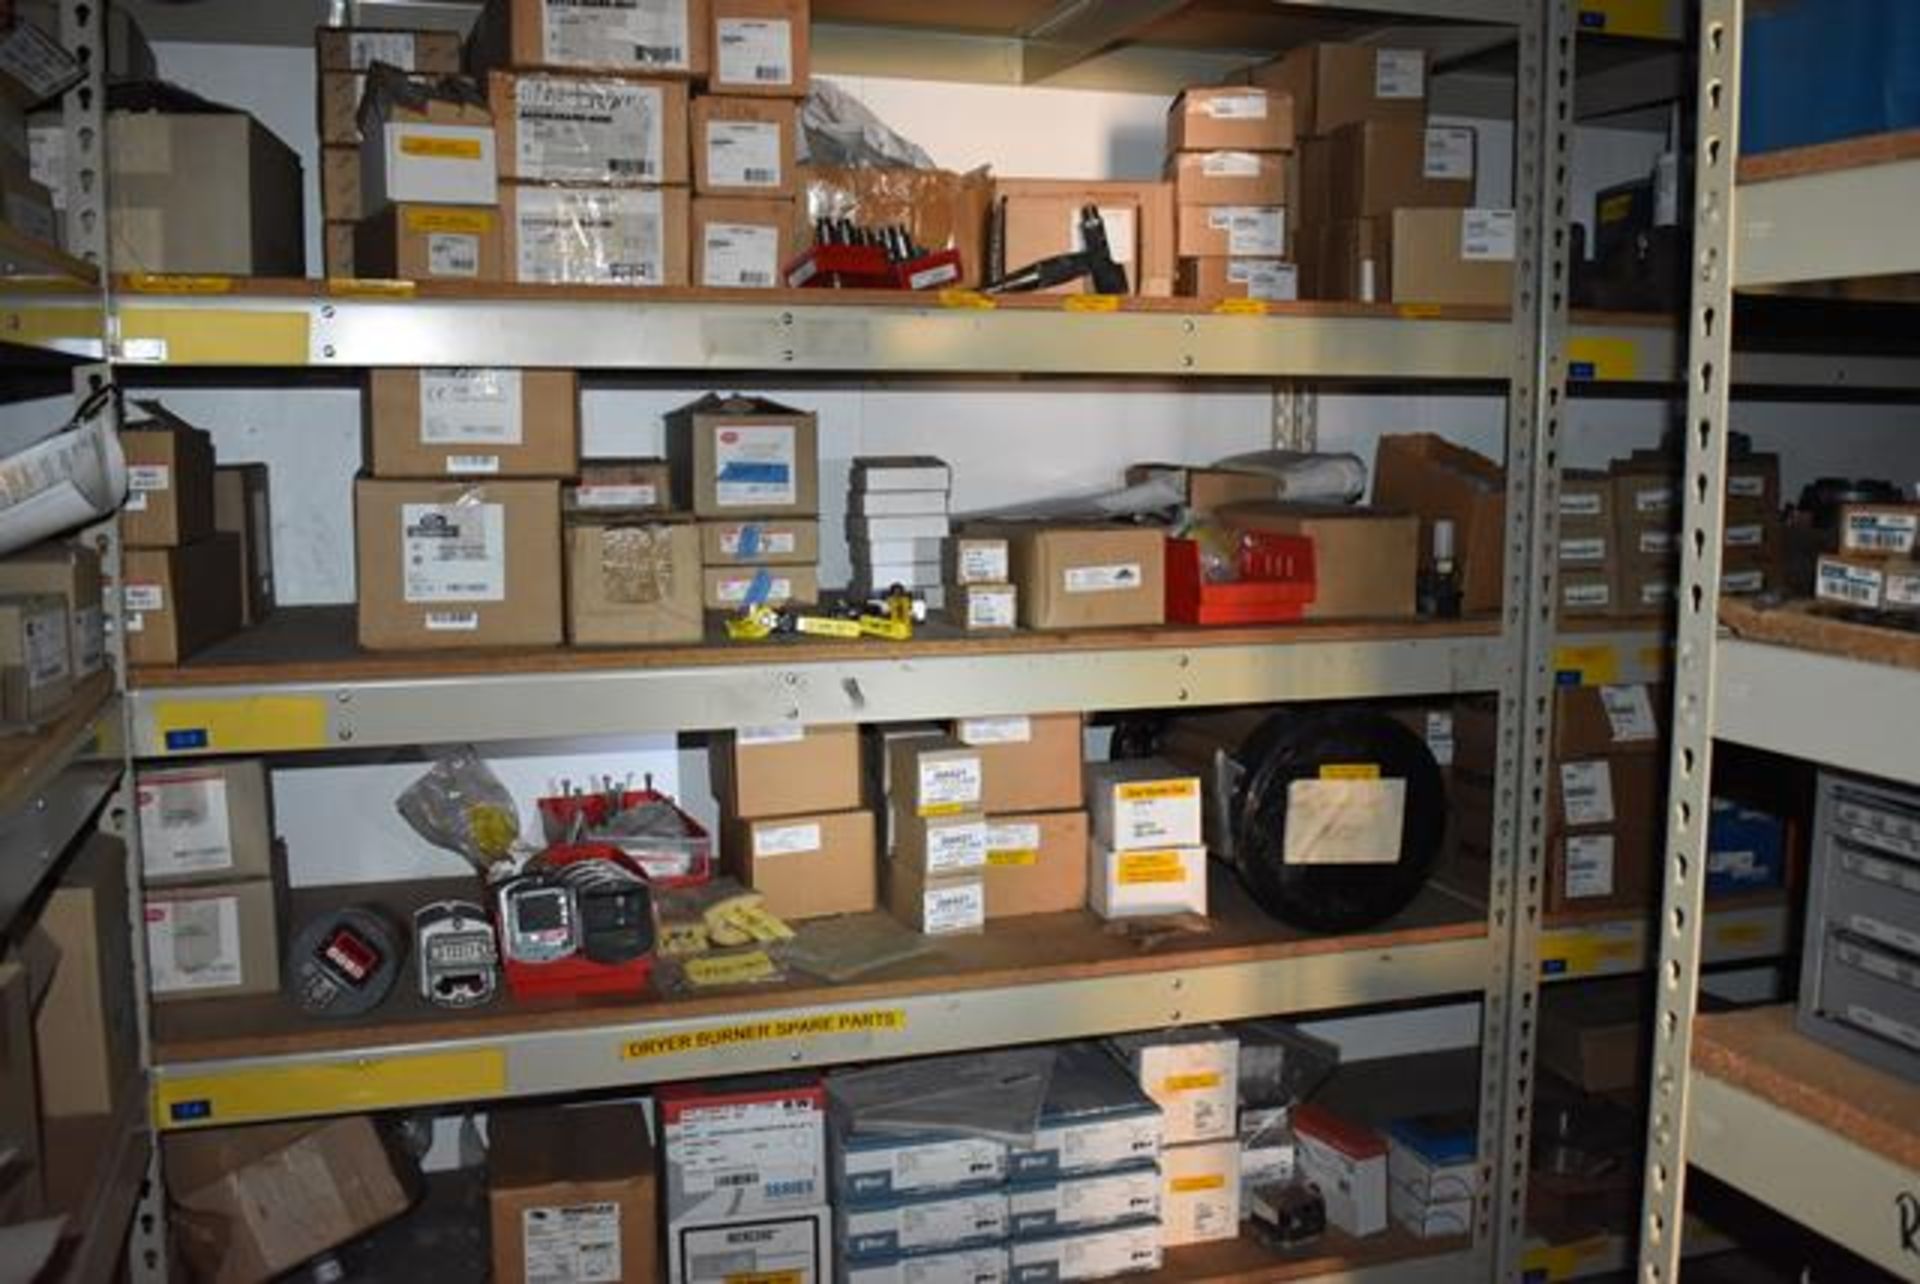 Stores Area Contents - (12) Shelf Sections, Bearings, Burner Parts, Eaton/Allen Bradley Electrical - Image 2 of 7